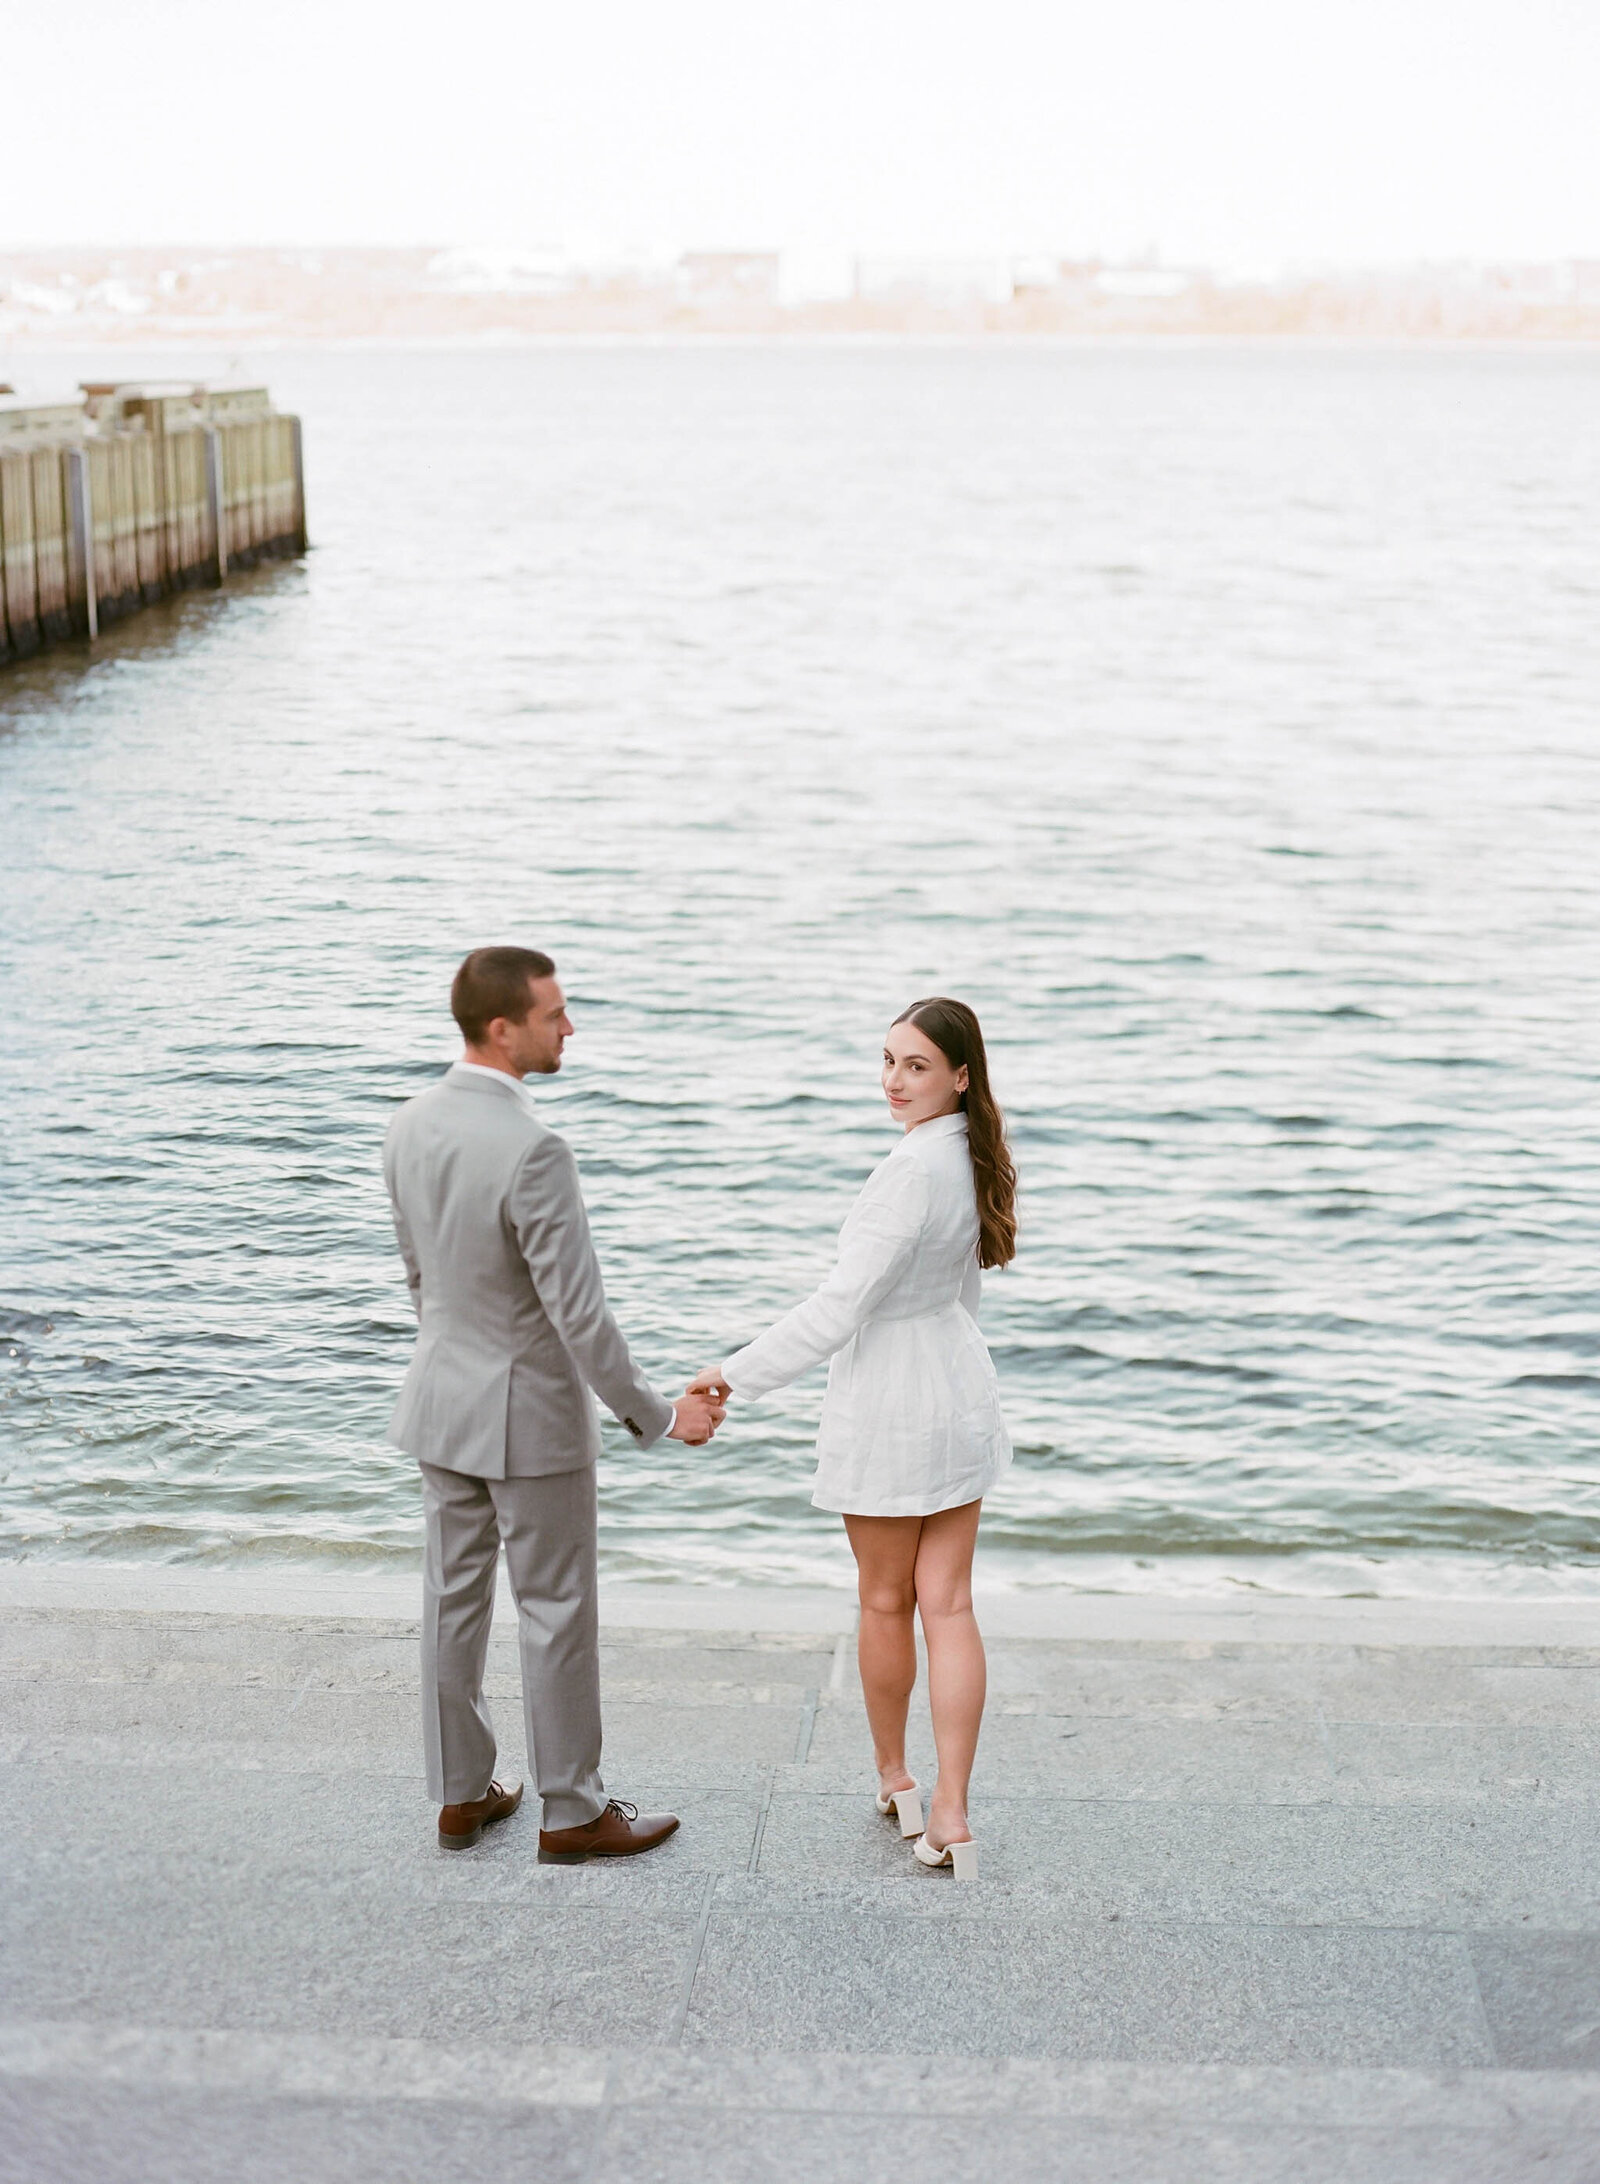 Jacqueline Anne Photography - Halifax Wedding Photographer - Downtown Engagement - Adam and Nicole-47